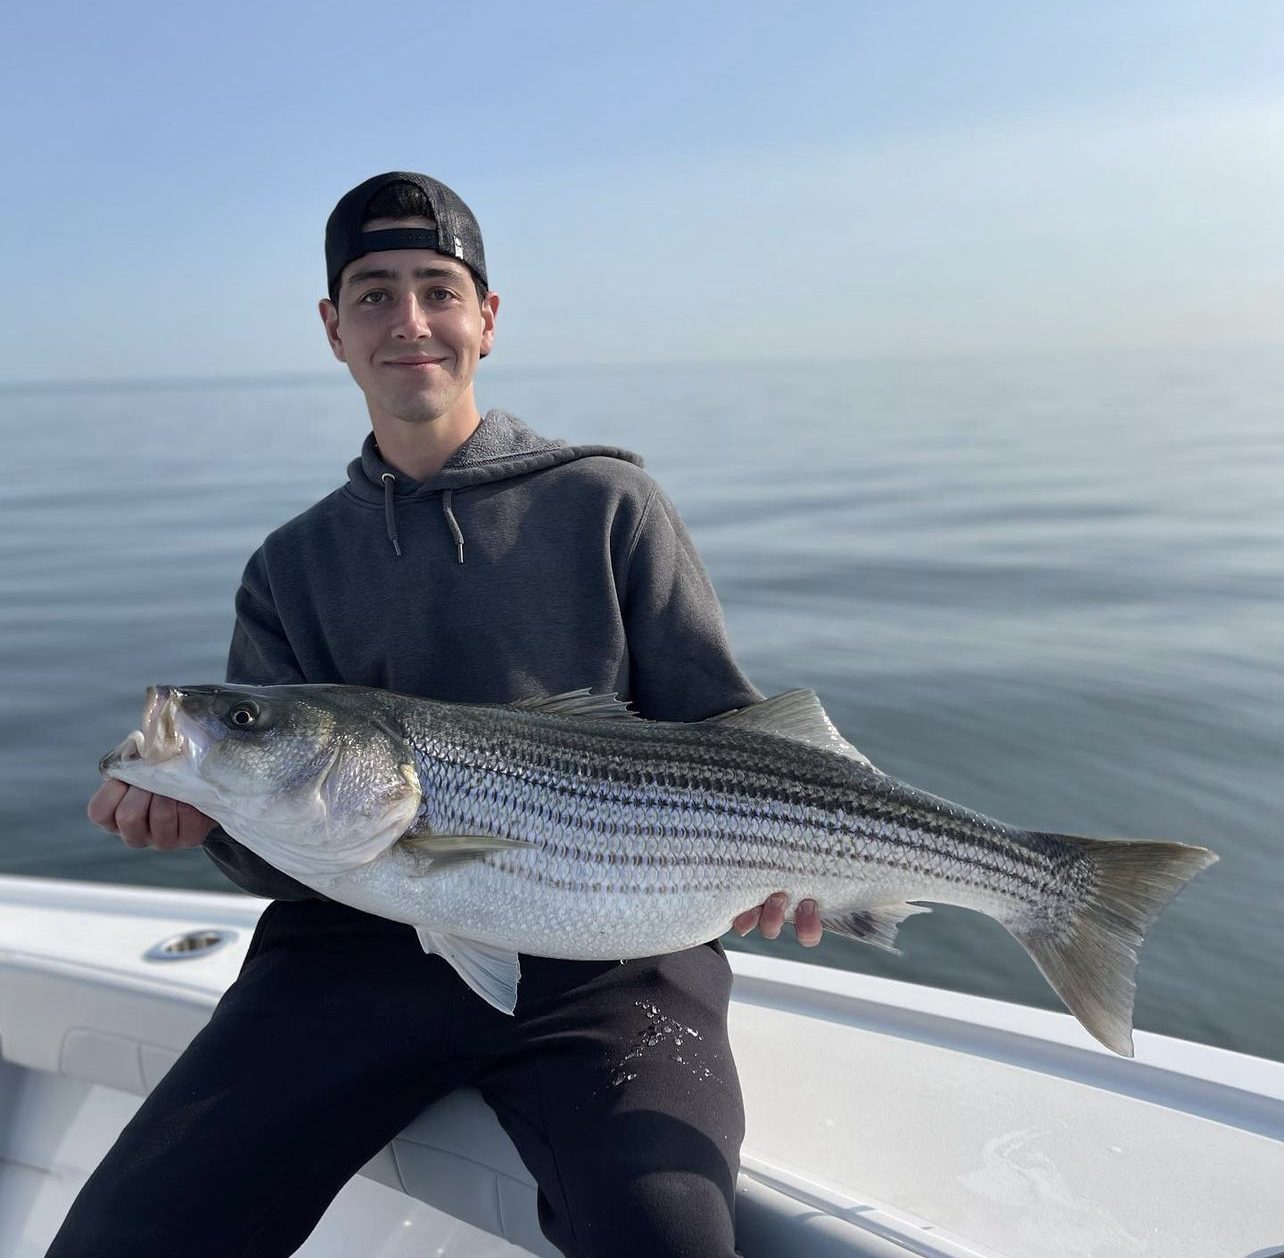 Eastern Long Island Fishing Report- May 11, 2023 - On The Water